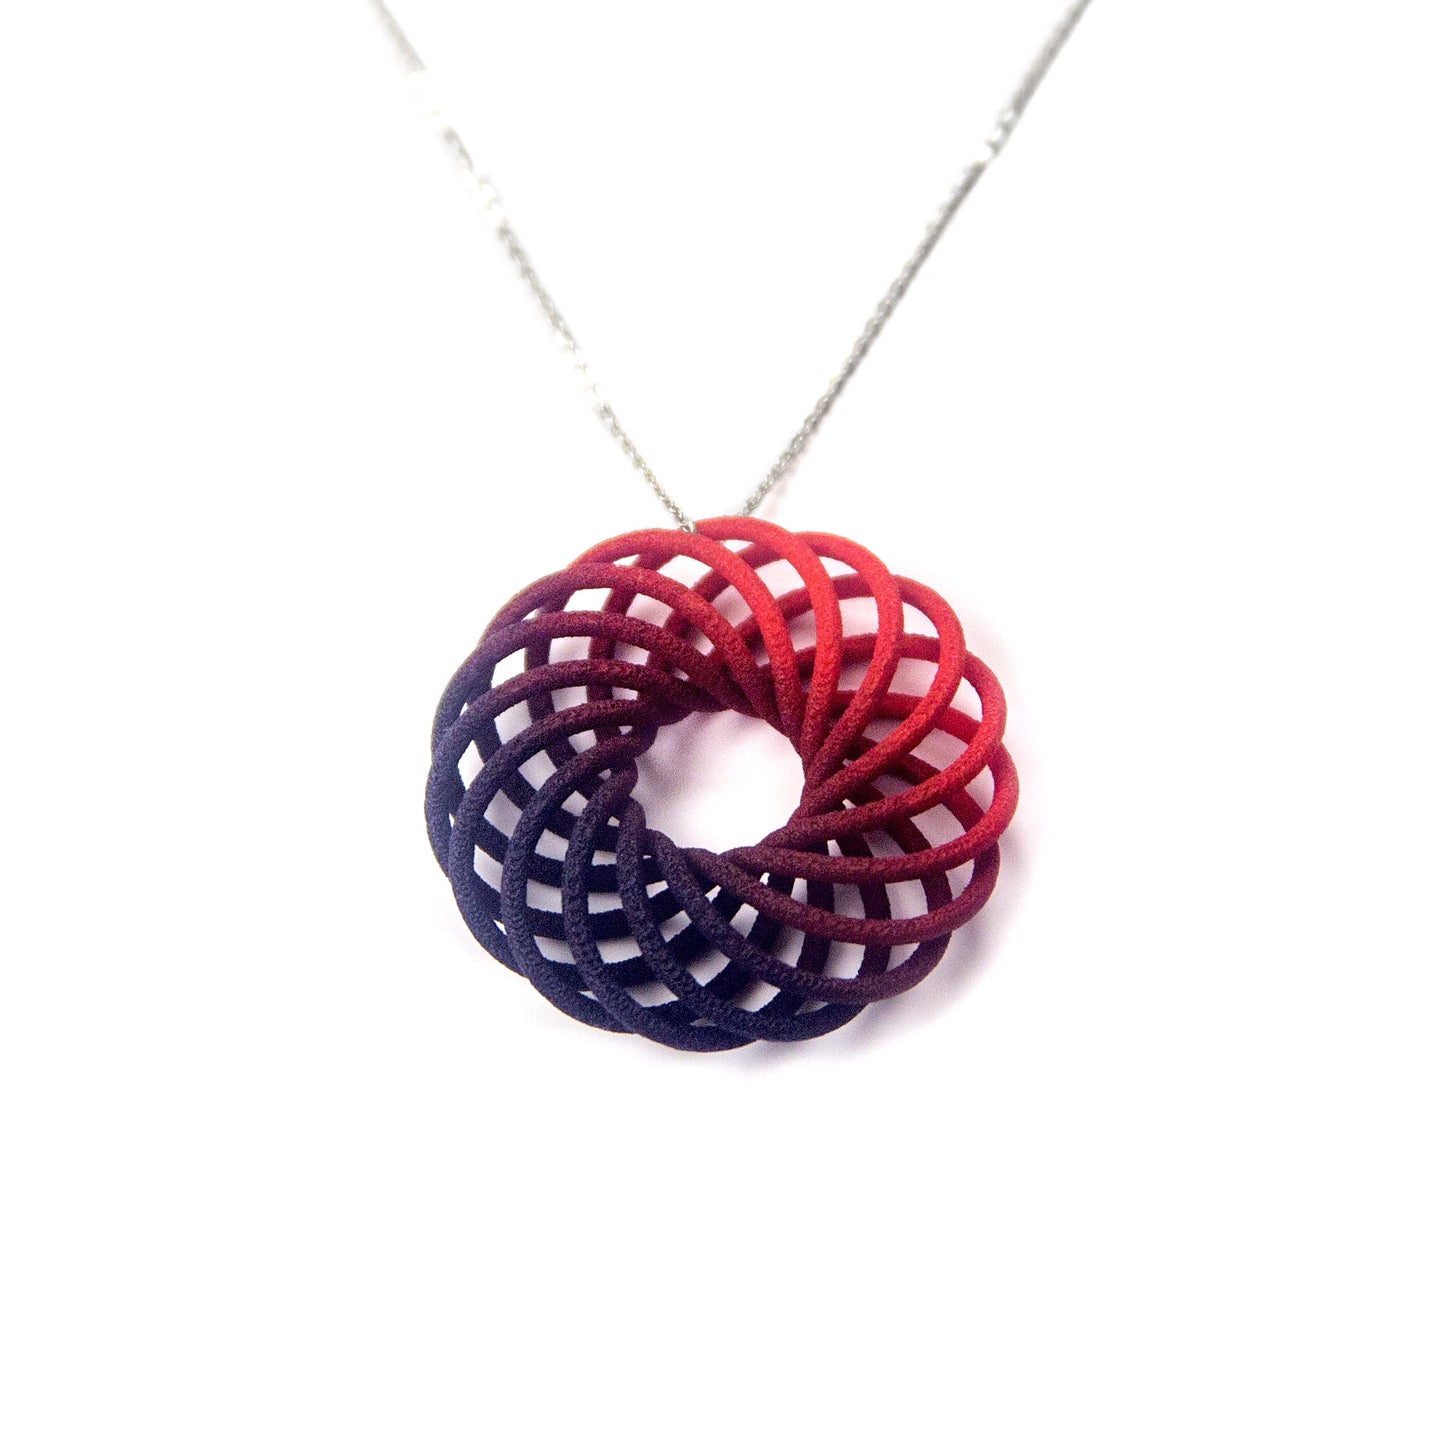 Small scarlet purple fade Vortex 3D printed pendant on a silver chain by Katy Luxton Jewellery